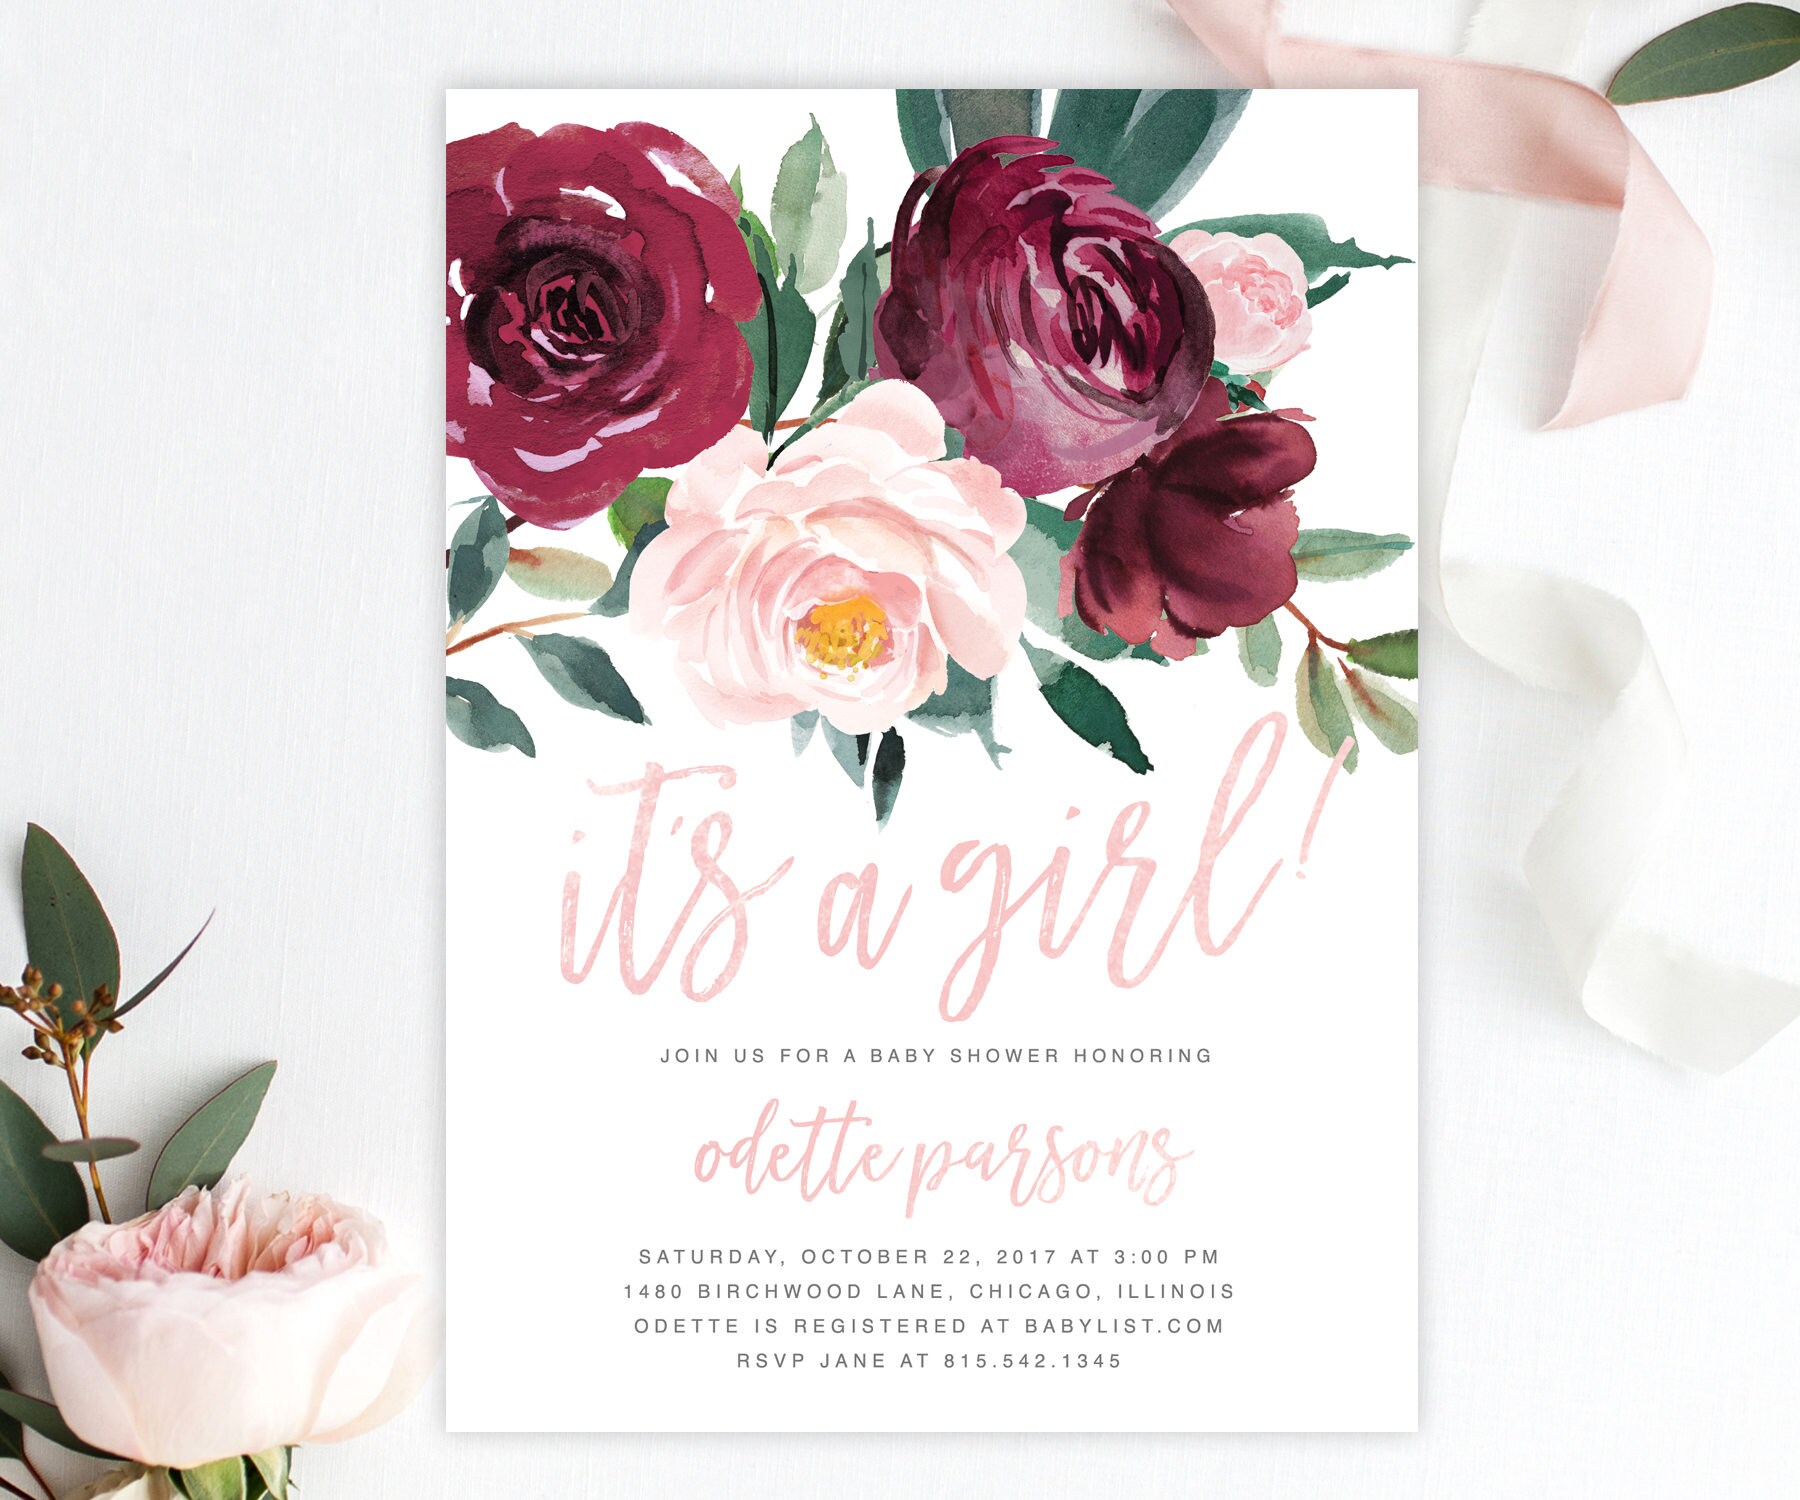 Baby Shower Invitation, It's A Girl Invite Marsala, Burgundy, Wine, Blush Pink Florals & Greenery - Printed Or Printable Pi-O, Odette